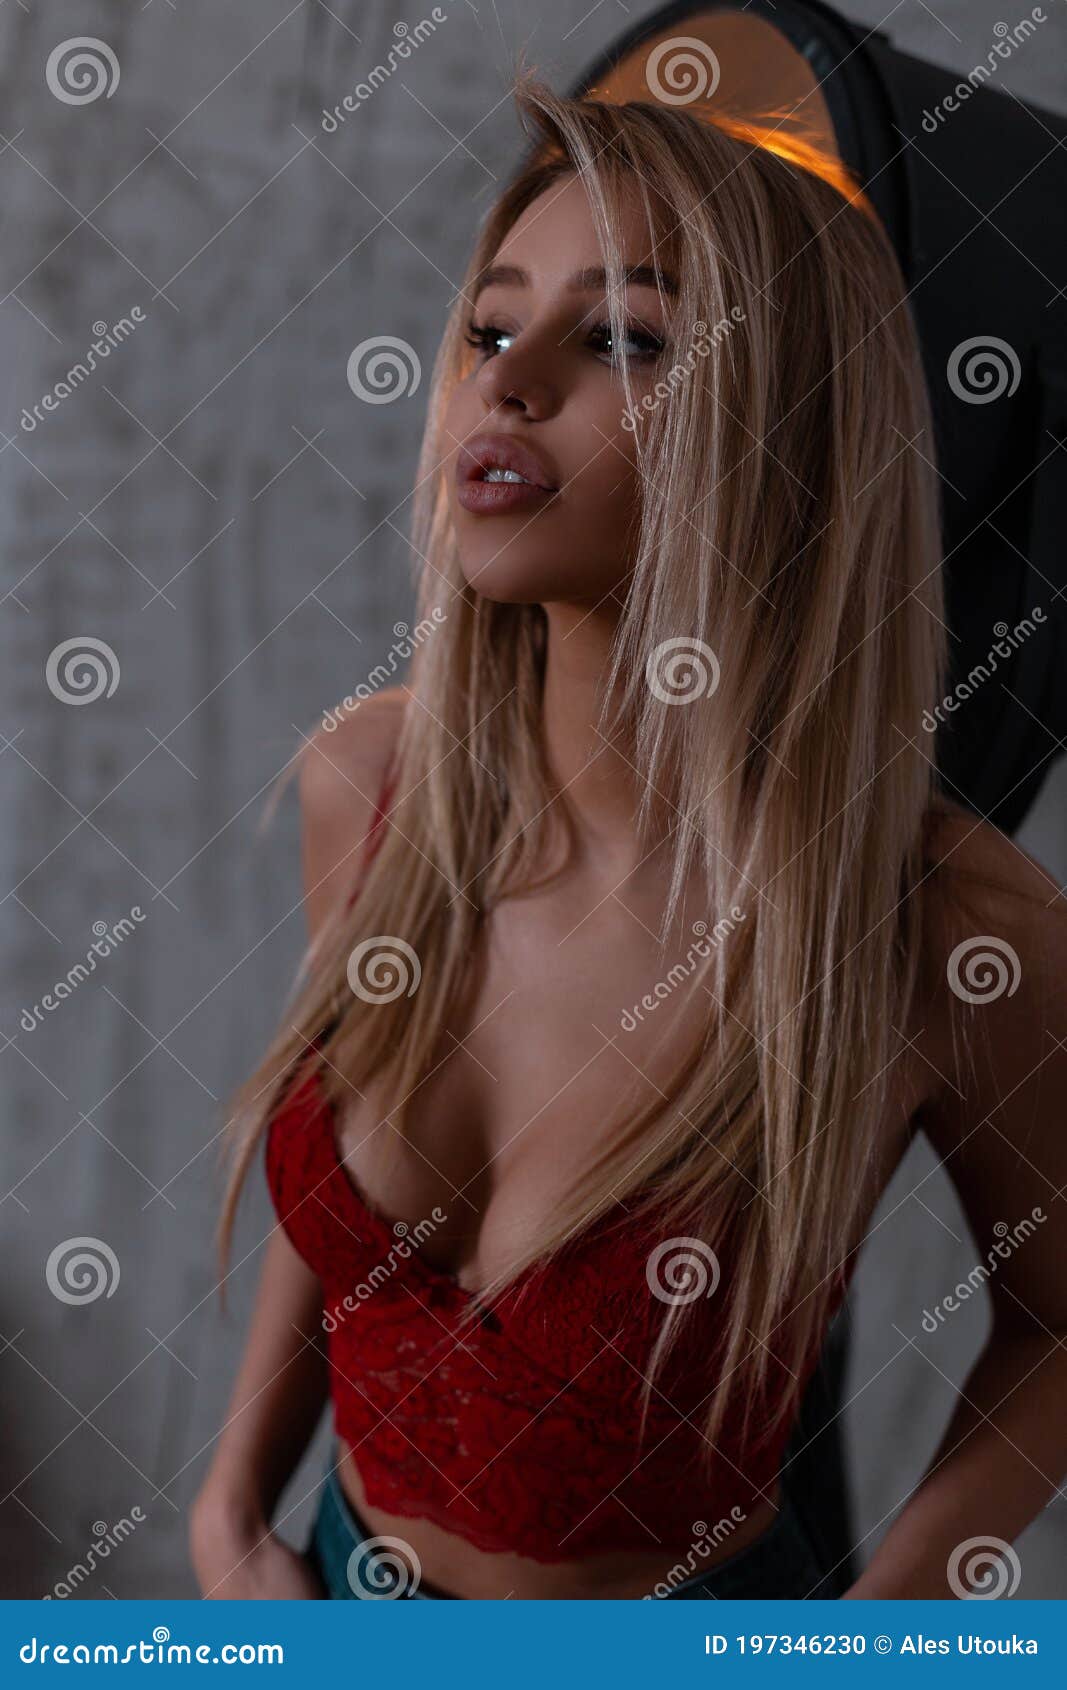 Pretty Young Woman in an Elegant Lace Red Bra with Beautiful Breasts in  Stylish Blue Jeans is Standing in a Room Near a Vintage Stock Photo - Image  of gorgeous, girl: 197346230